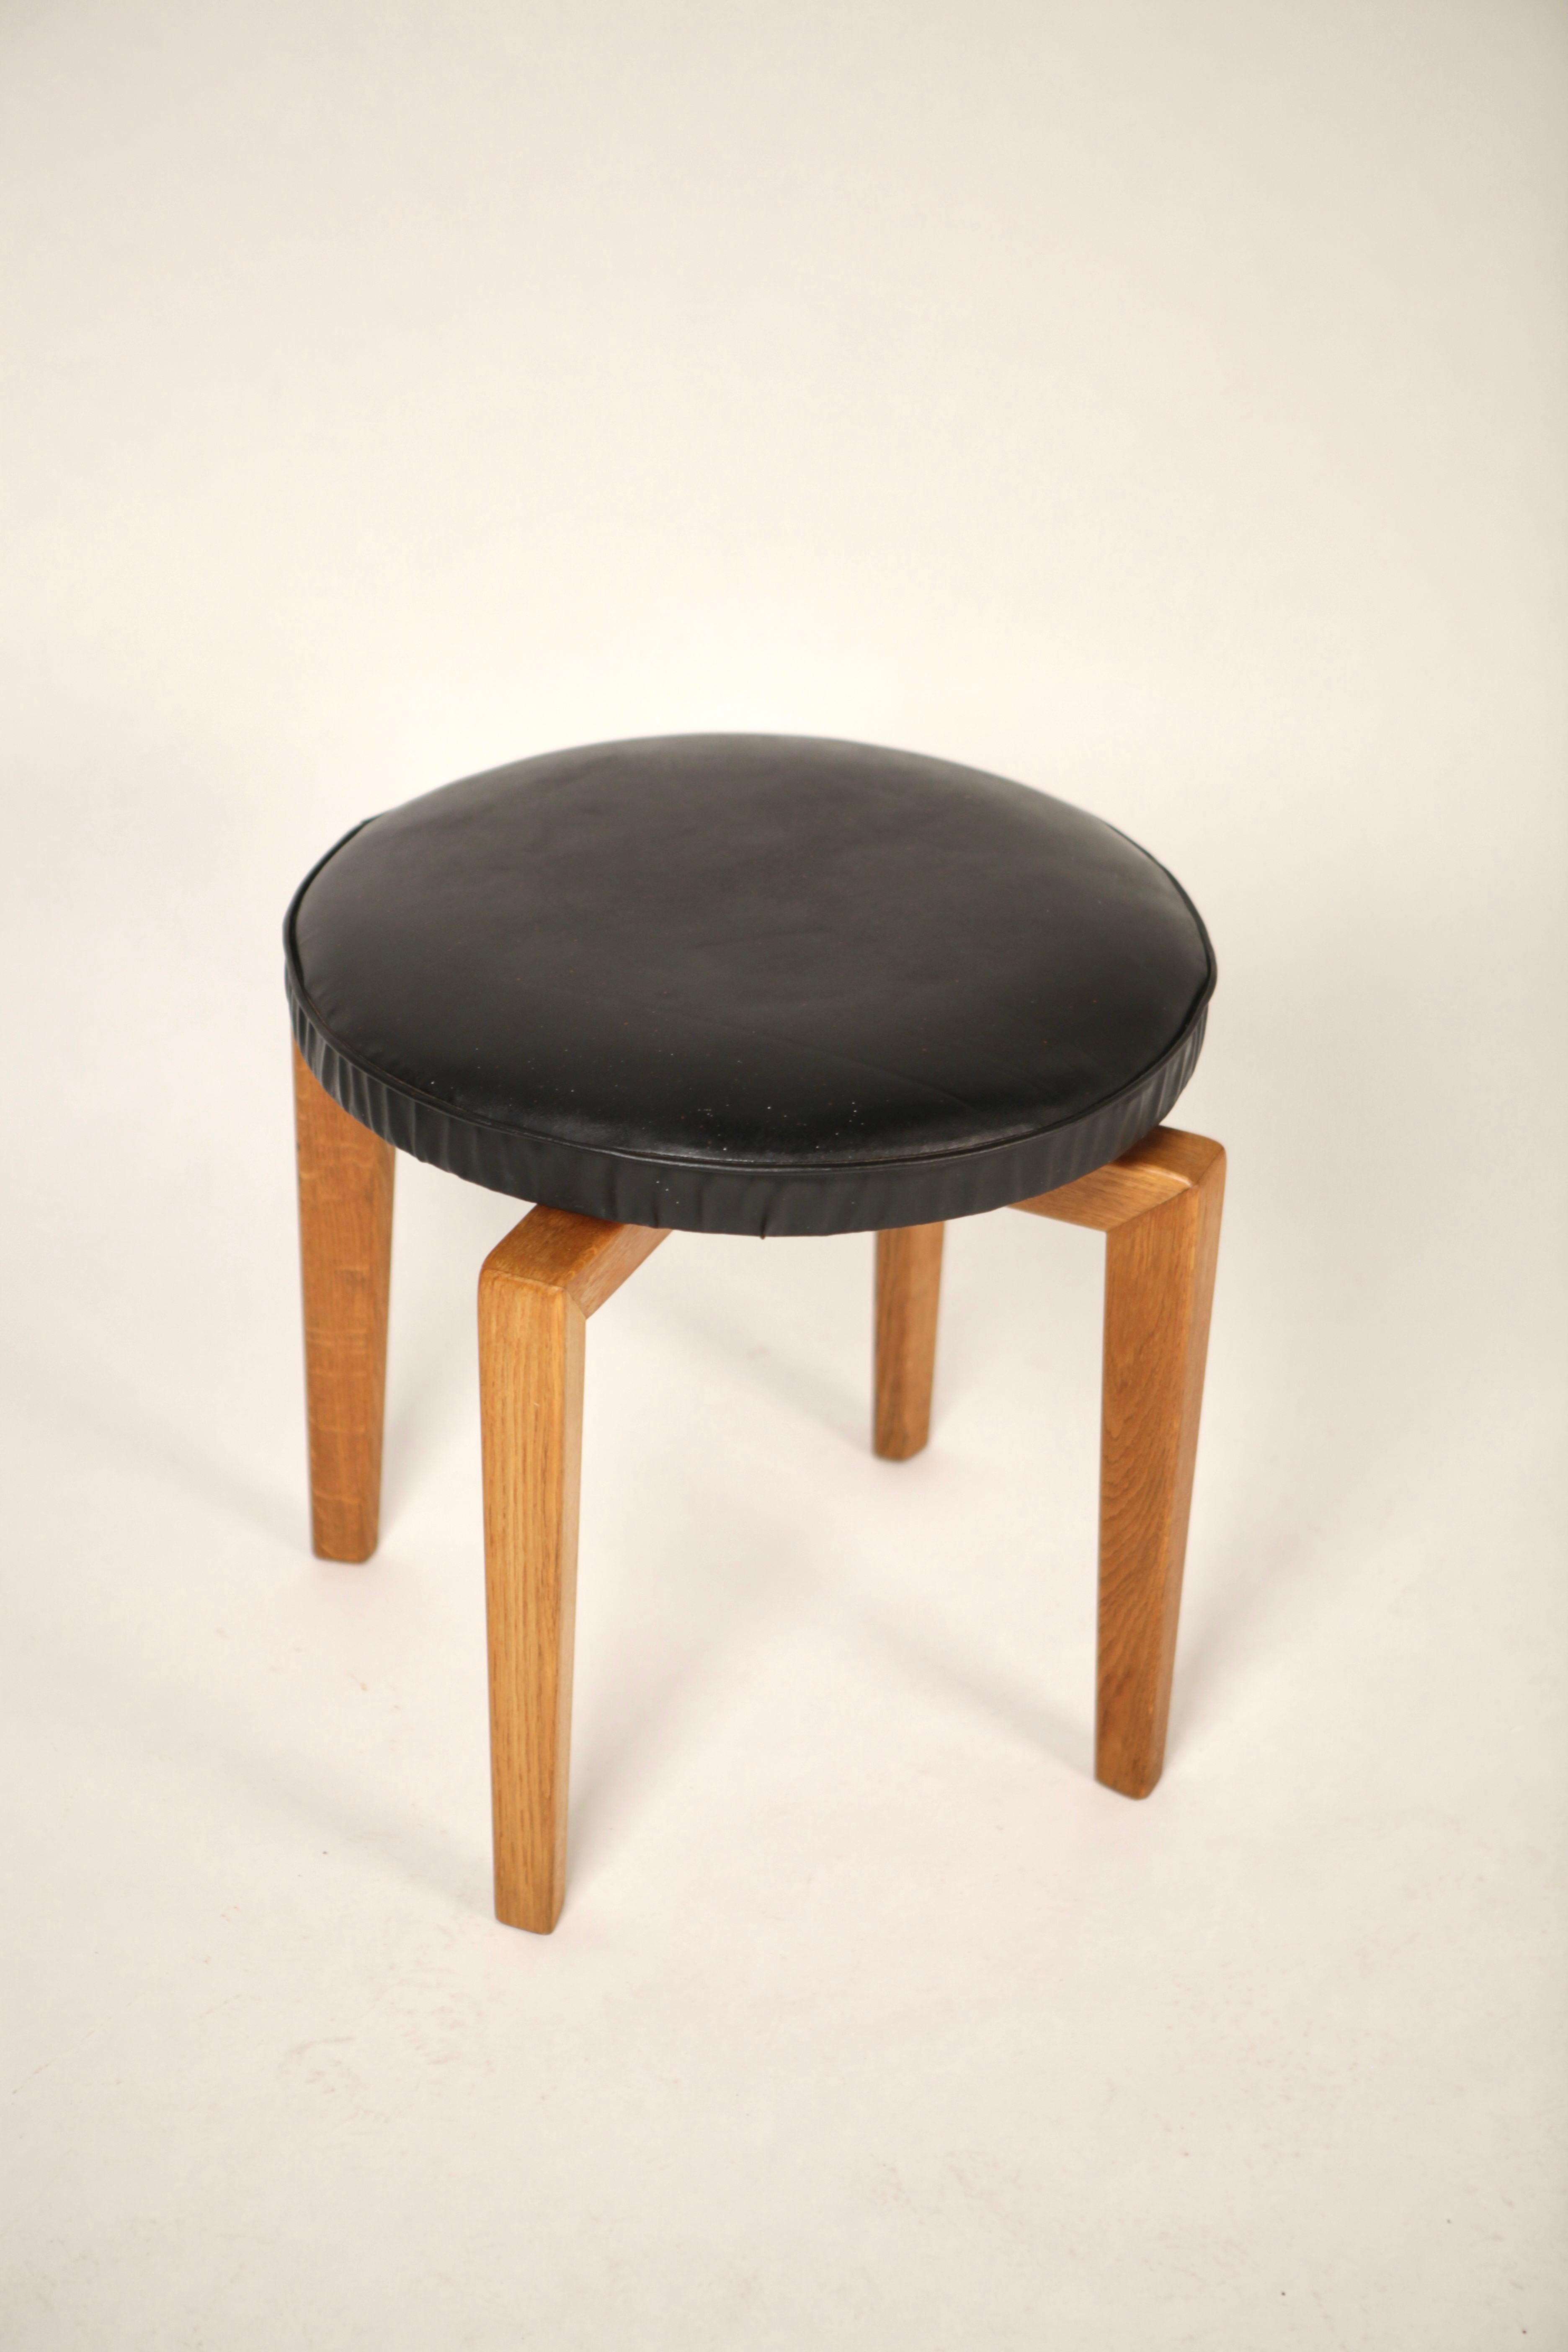 Mid-20th Century Uno & Östen Kristiansson, Rare Stool in Oak and Leather for Luxus, Sweden 1960s For Sale